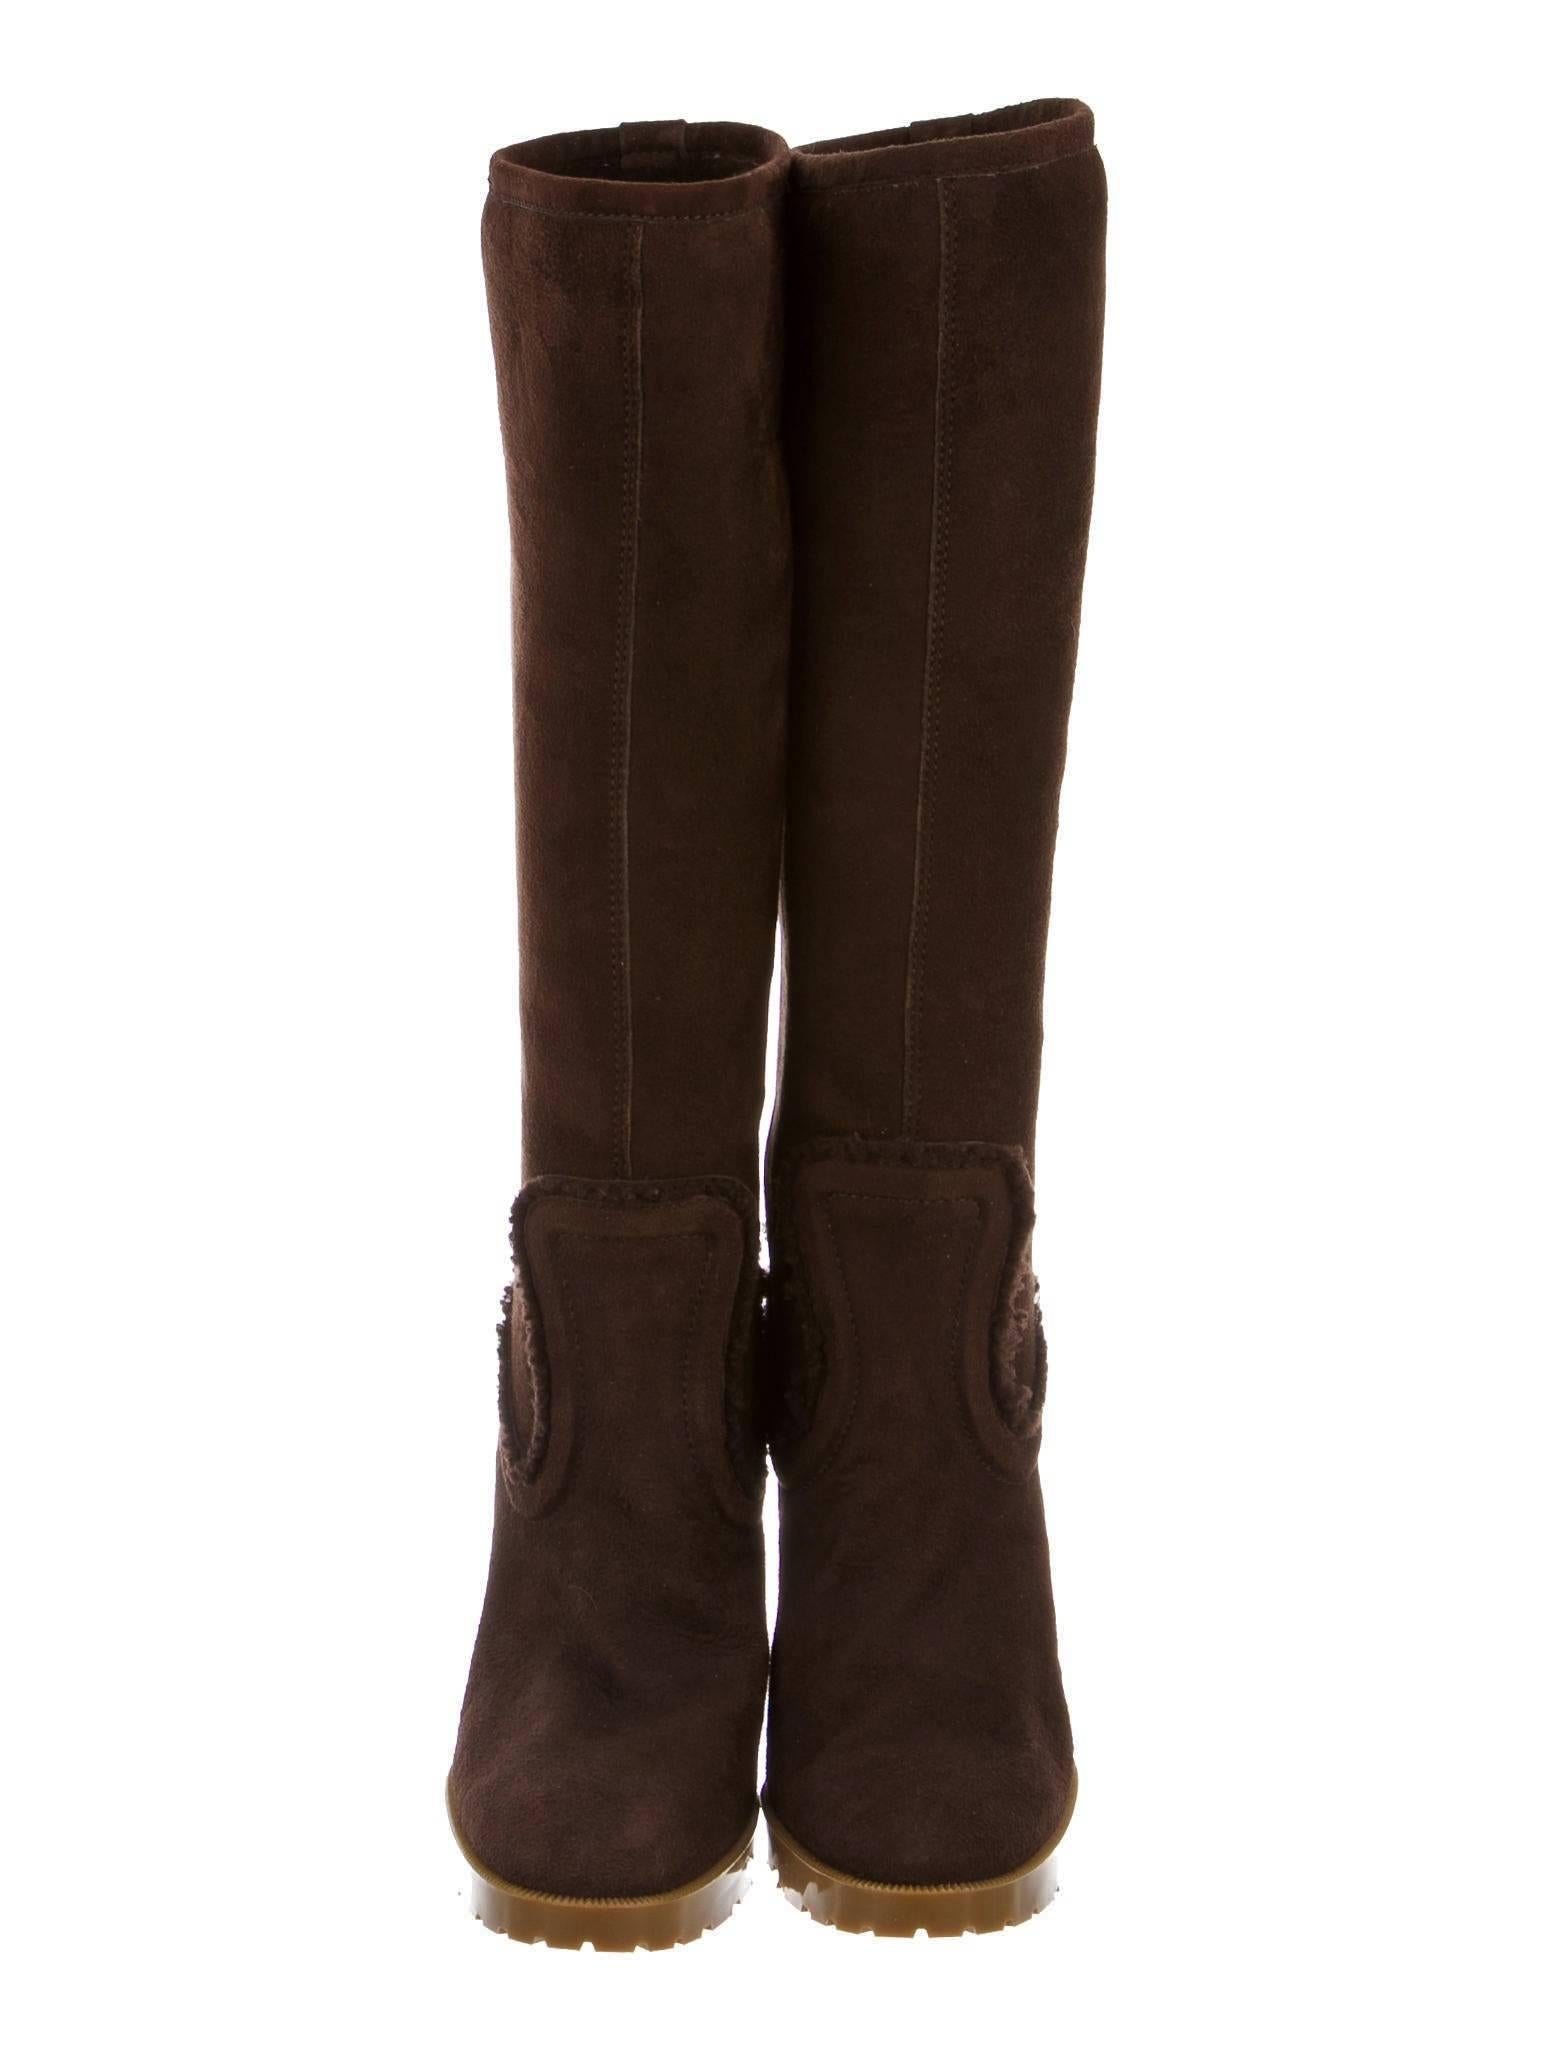 New Gucci Chocolate Brown Shearling Wedge Boots Sz 7 For Sale 1